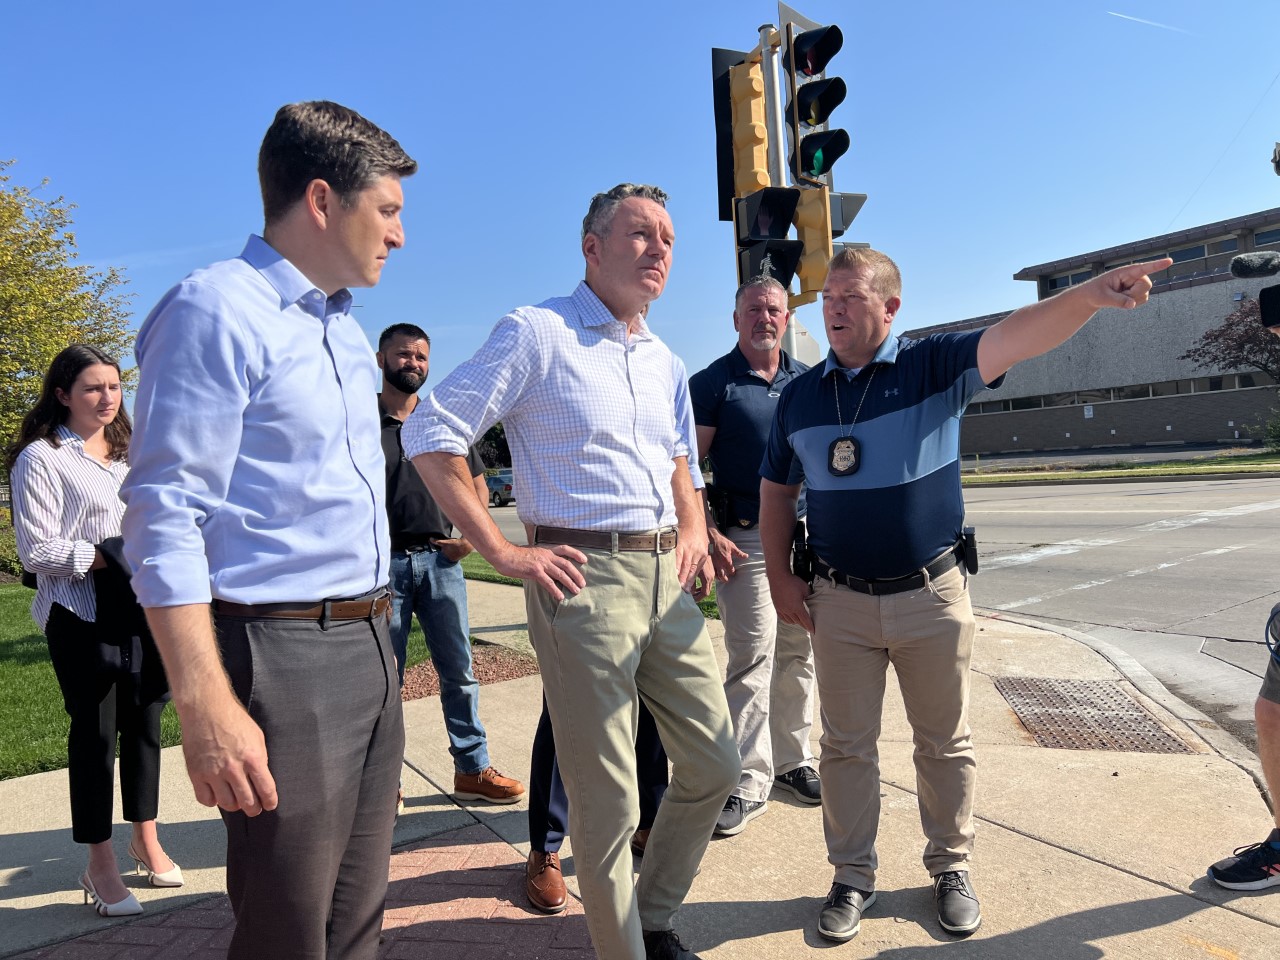 Tim Michels, accompanied by police officers, tours an area in Kenosha that was impacted by protests in 2020